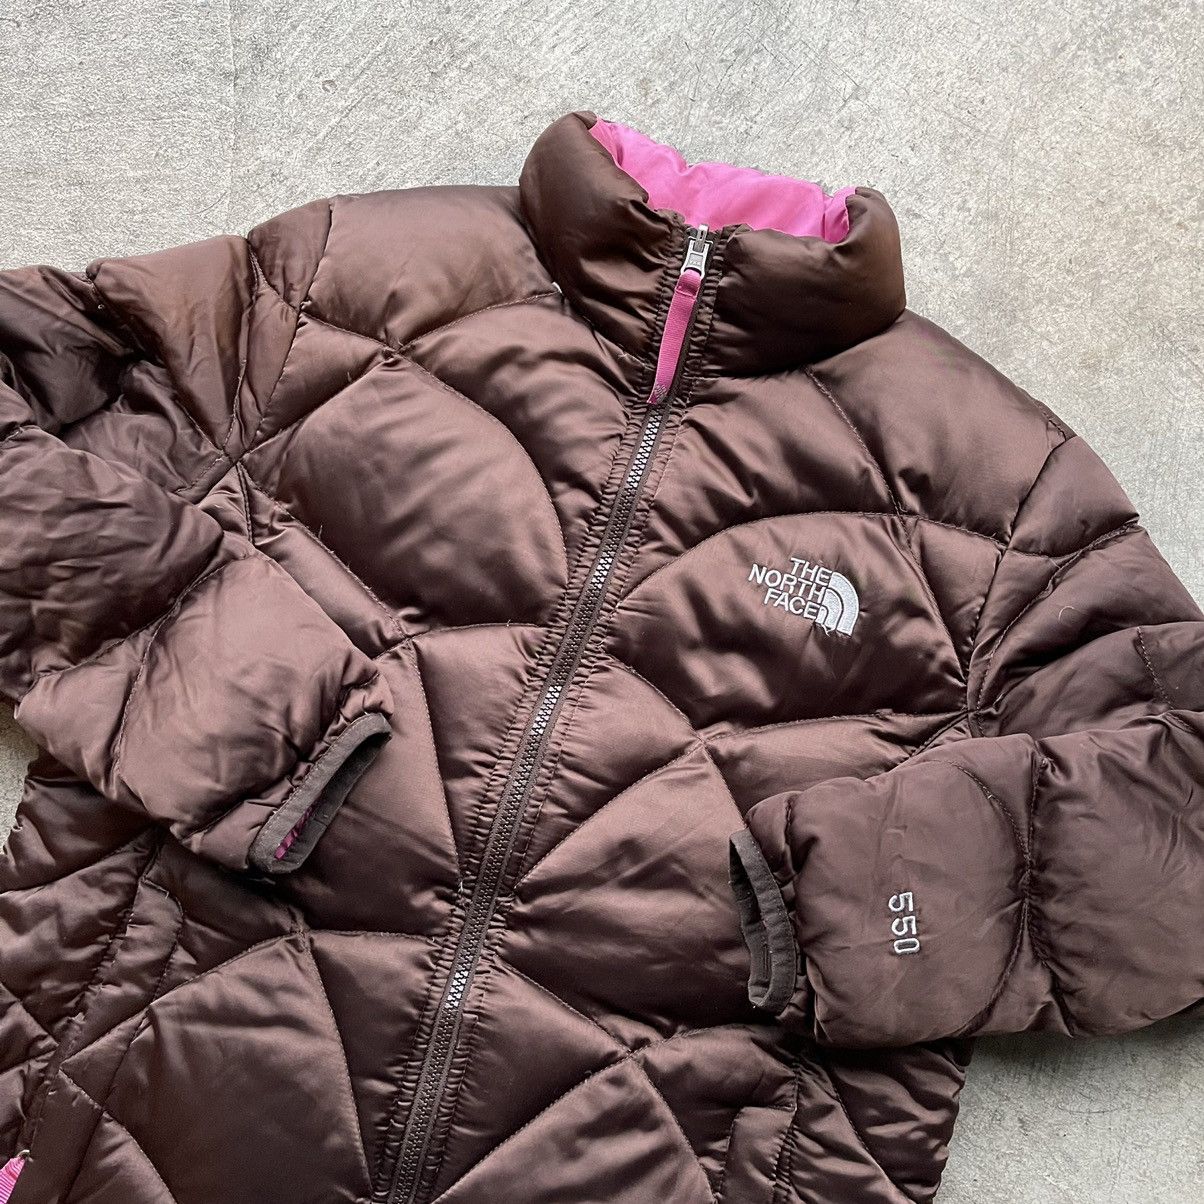 Vintage Brown North Face Puffer Jacket Nuptse 550 S Size US S / EU 44-46 / 1 - 8 Preview